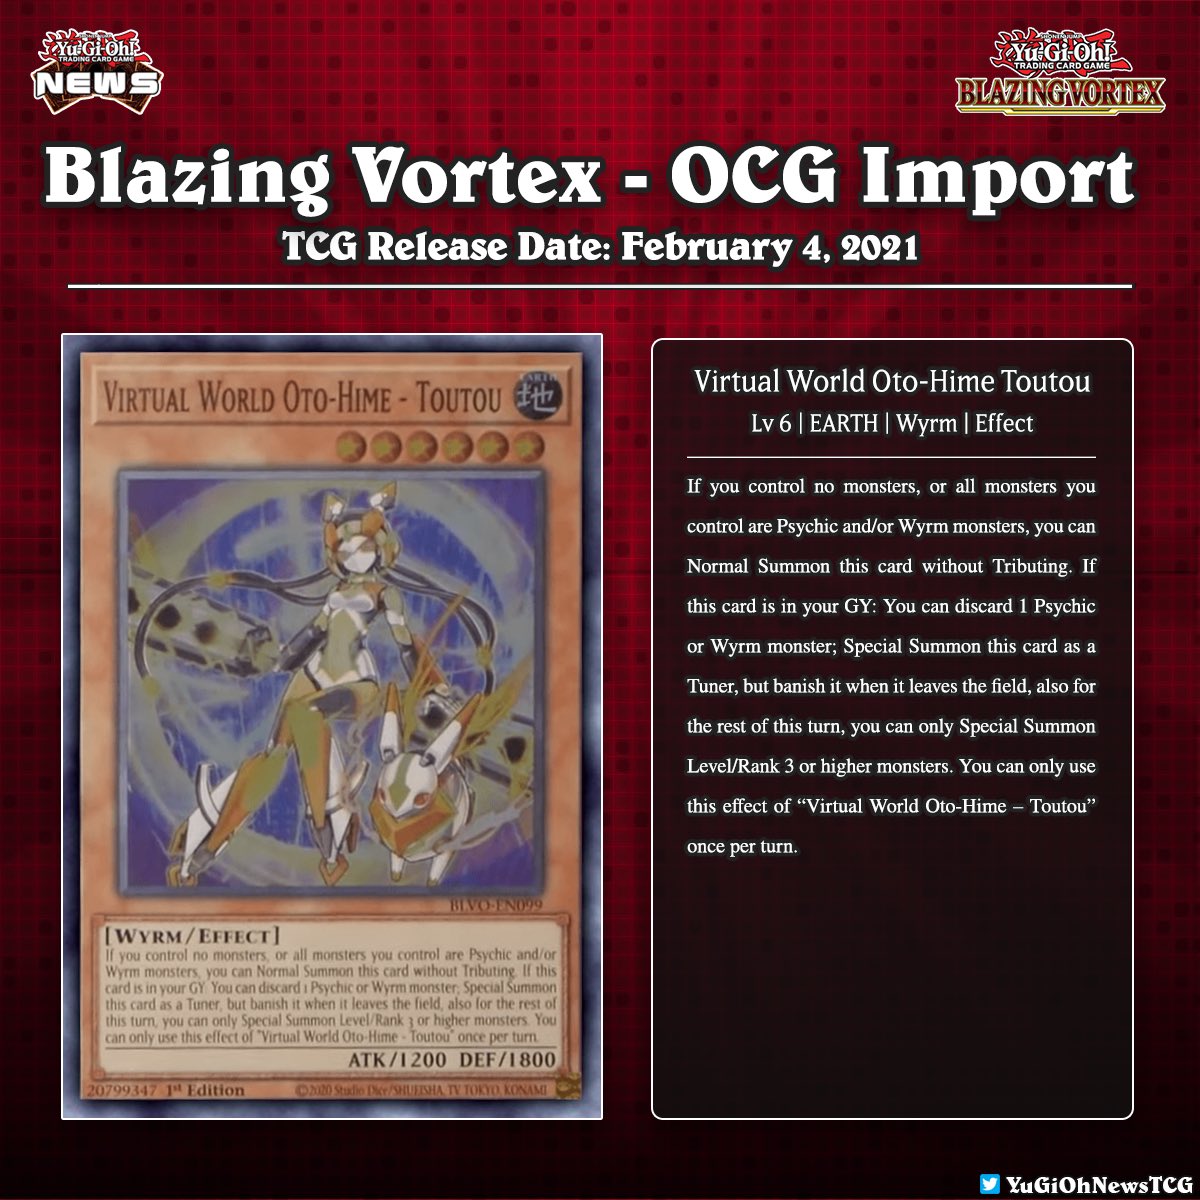 ❰𝗕𝗹𝗮𝘇𝗶𝗻𝗴 𝗩𝗼𝗿𝘁𝗲𝘅❱This card was included in volume 2 of the Yu-Gi-Oh! OCG Structu...